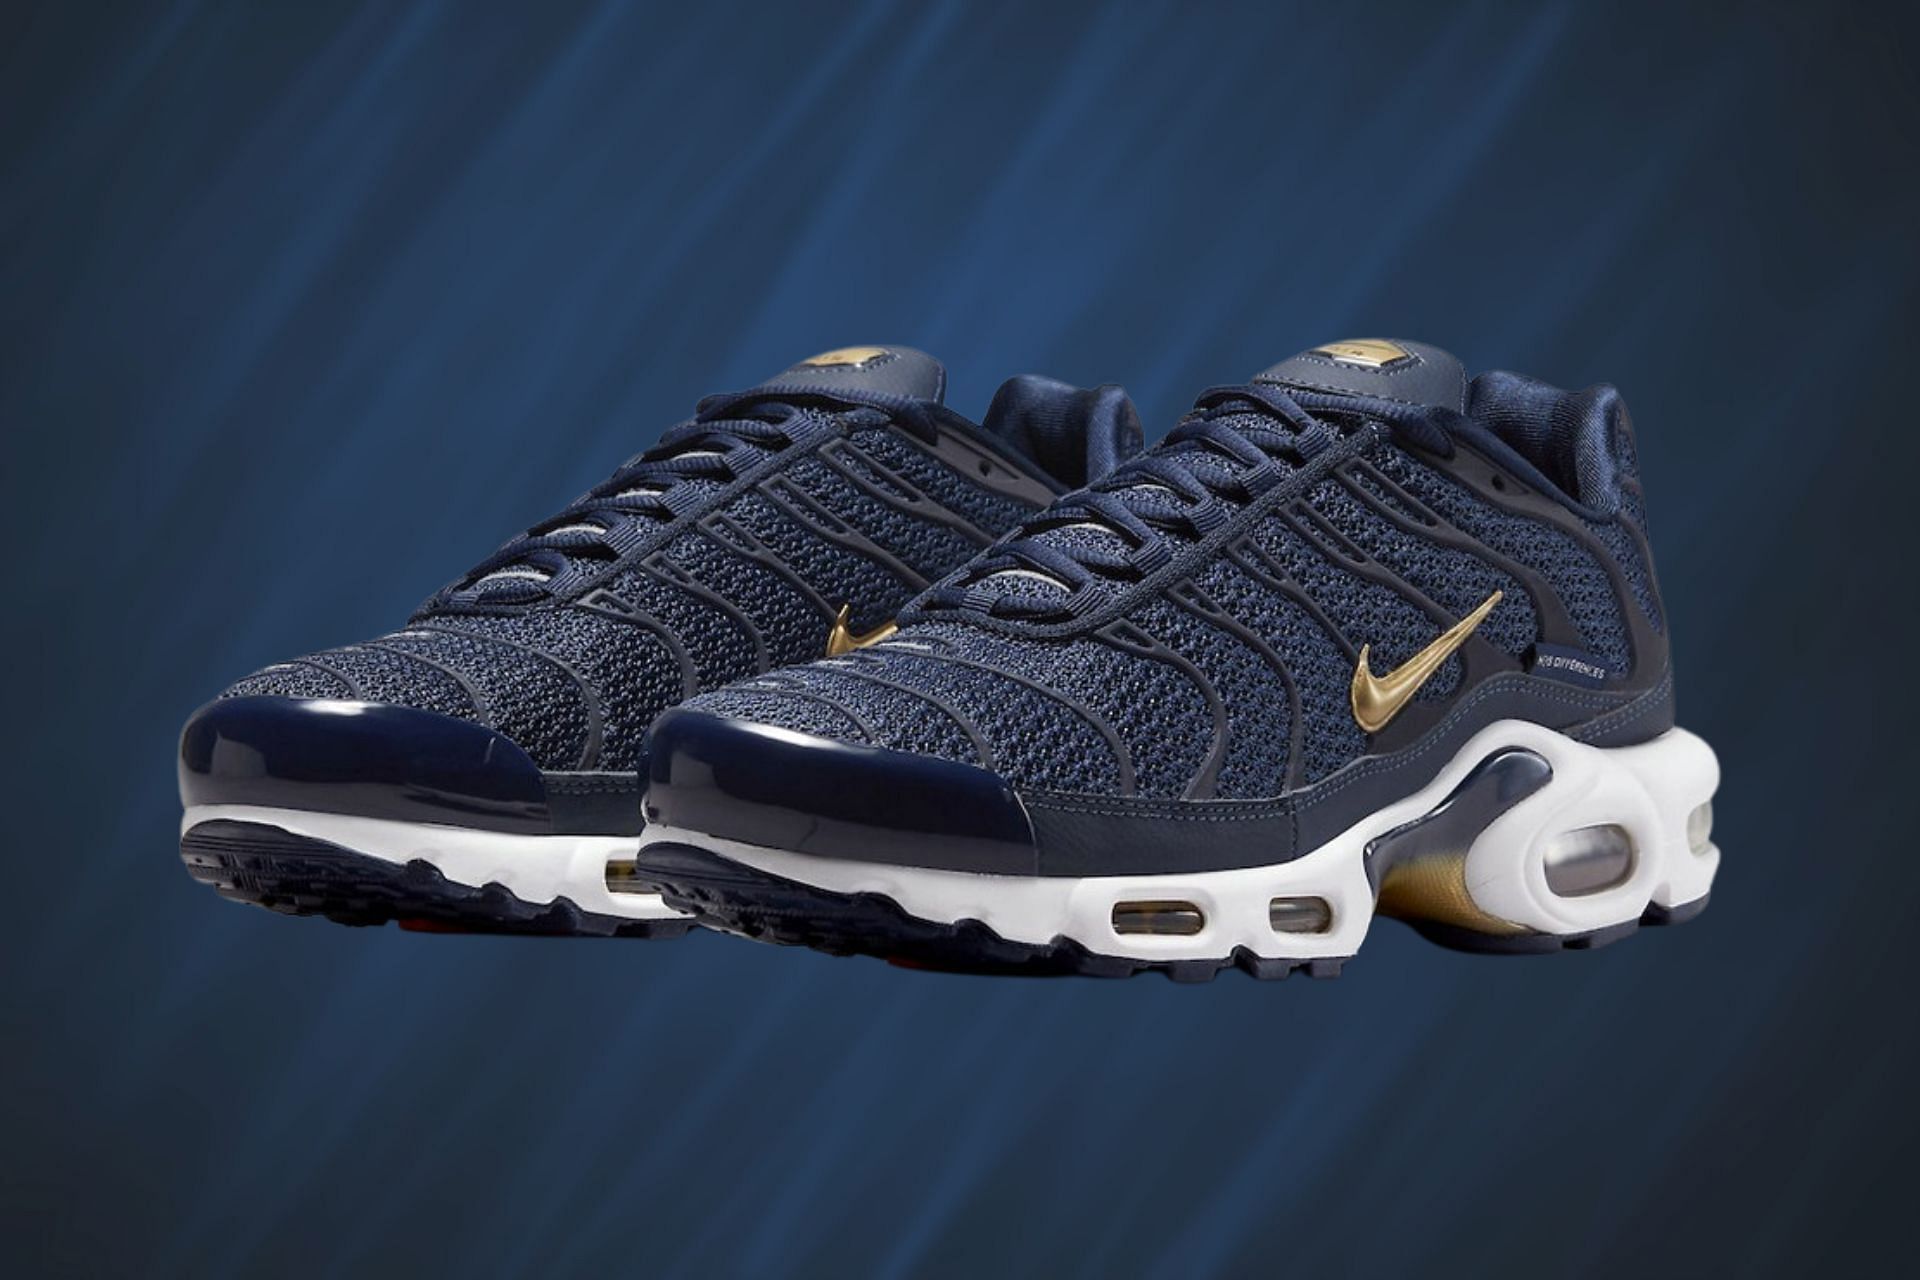 Where to buy Air Max Plus Football Price, release date, and more explored